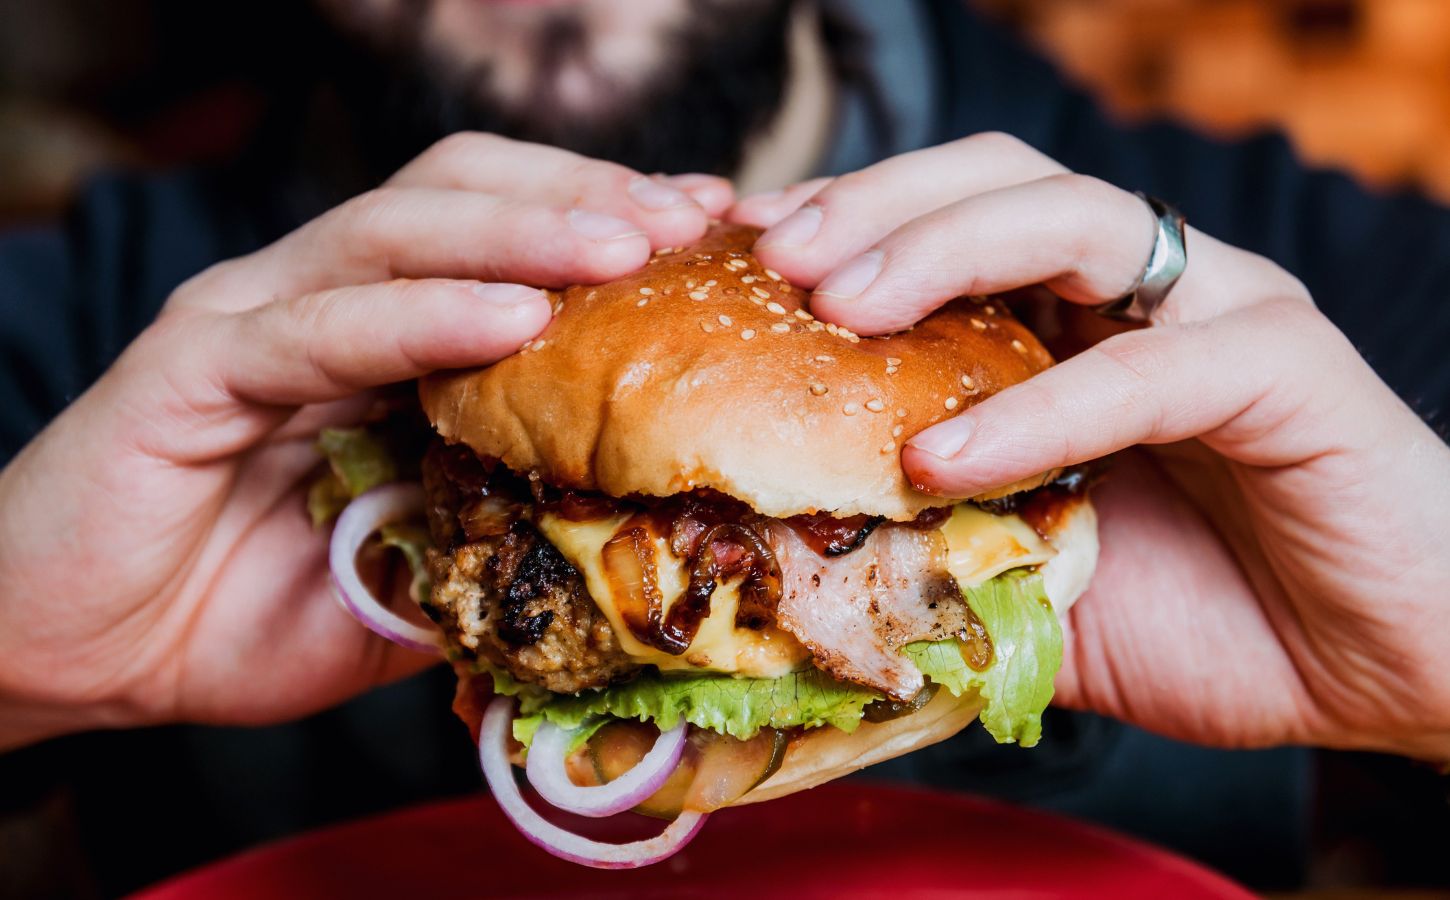 Photo shows a man's hands as he holds a meat-based burger up to the camera